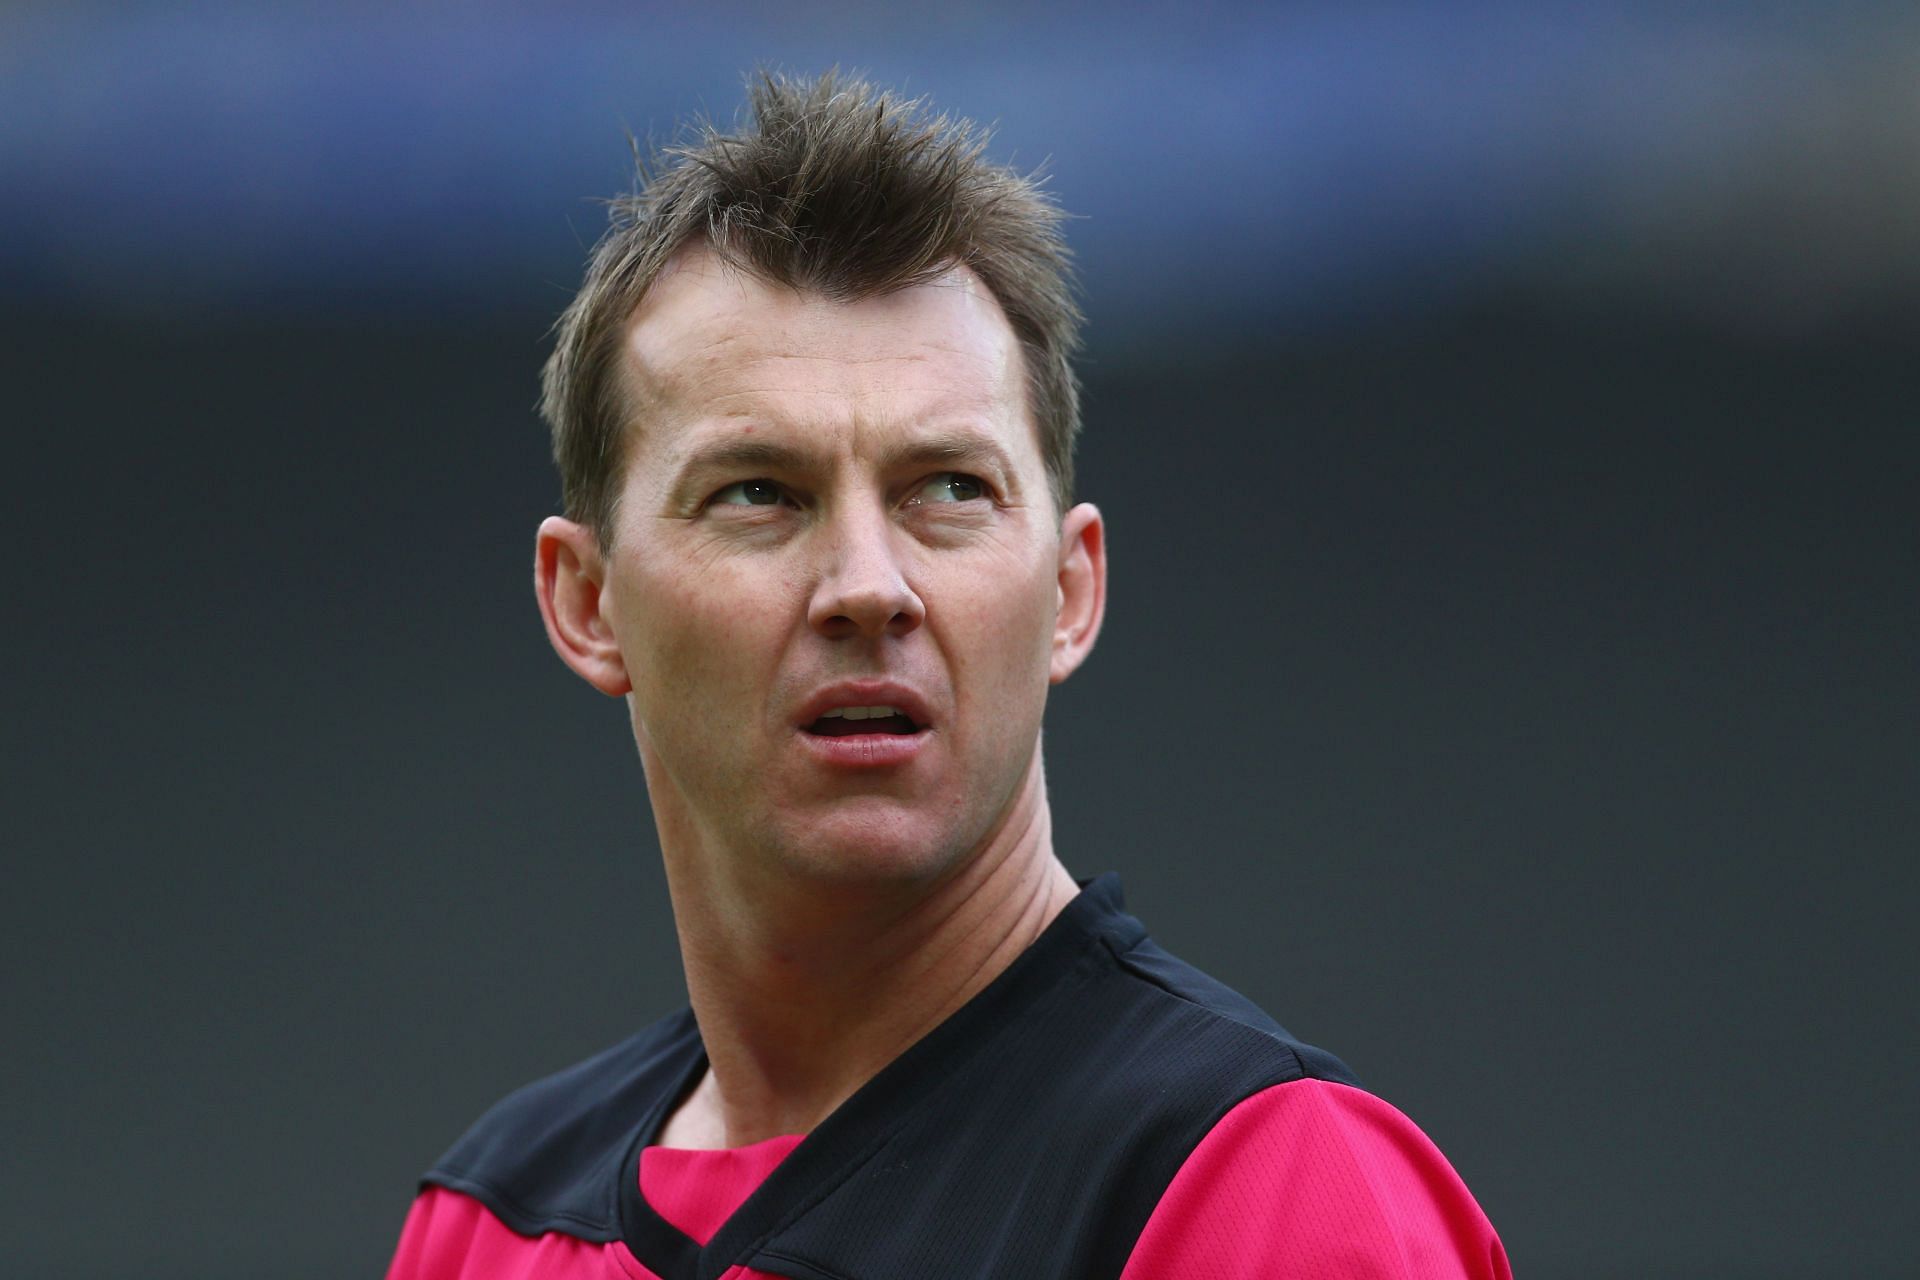 Brett Lee is very famous in India